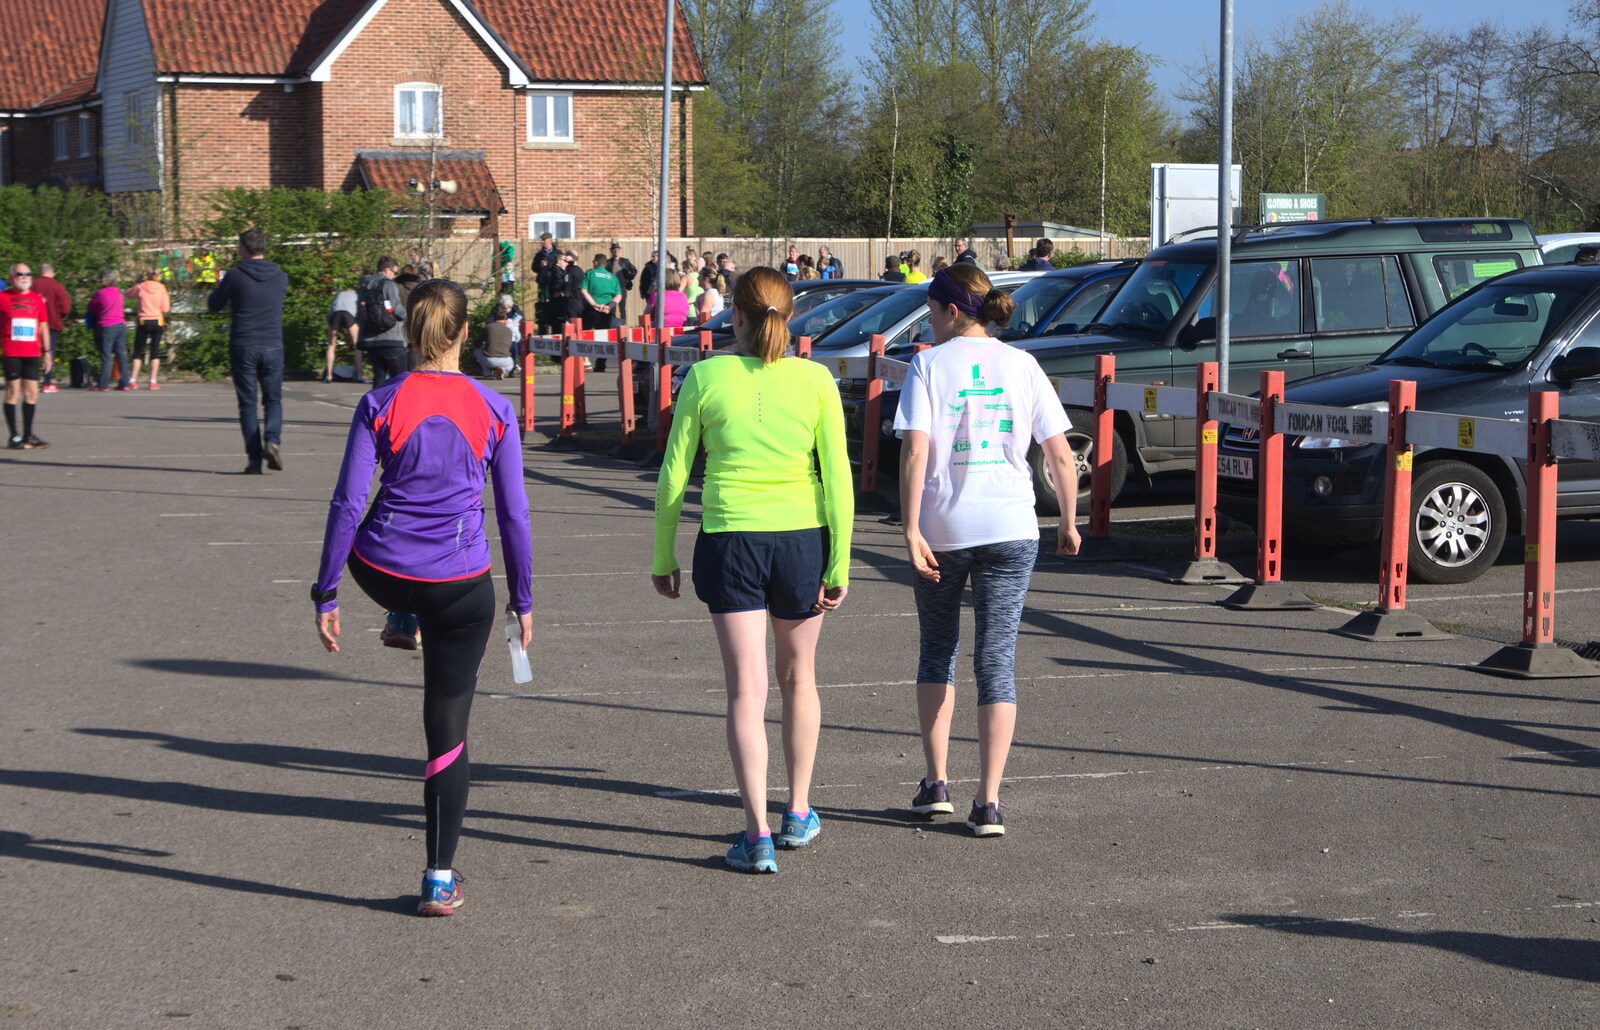 Isobel and Allyson warm up from The Black Dog Festival of Running, Bungay, Suffolk - 2nd April 2017